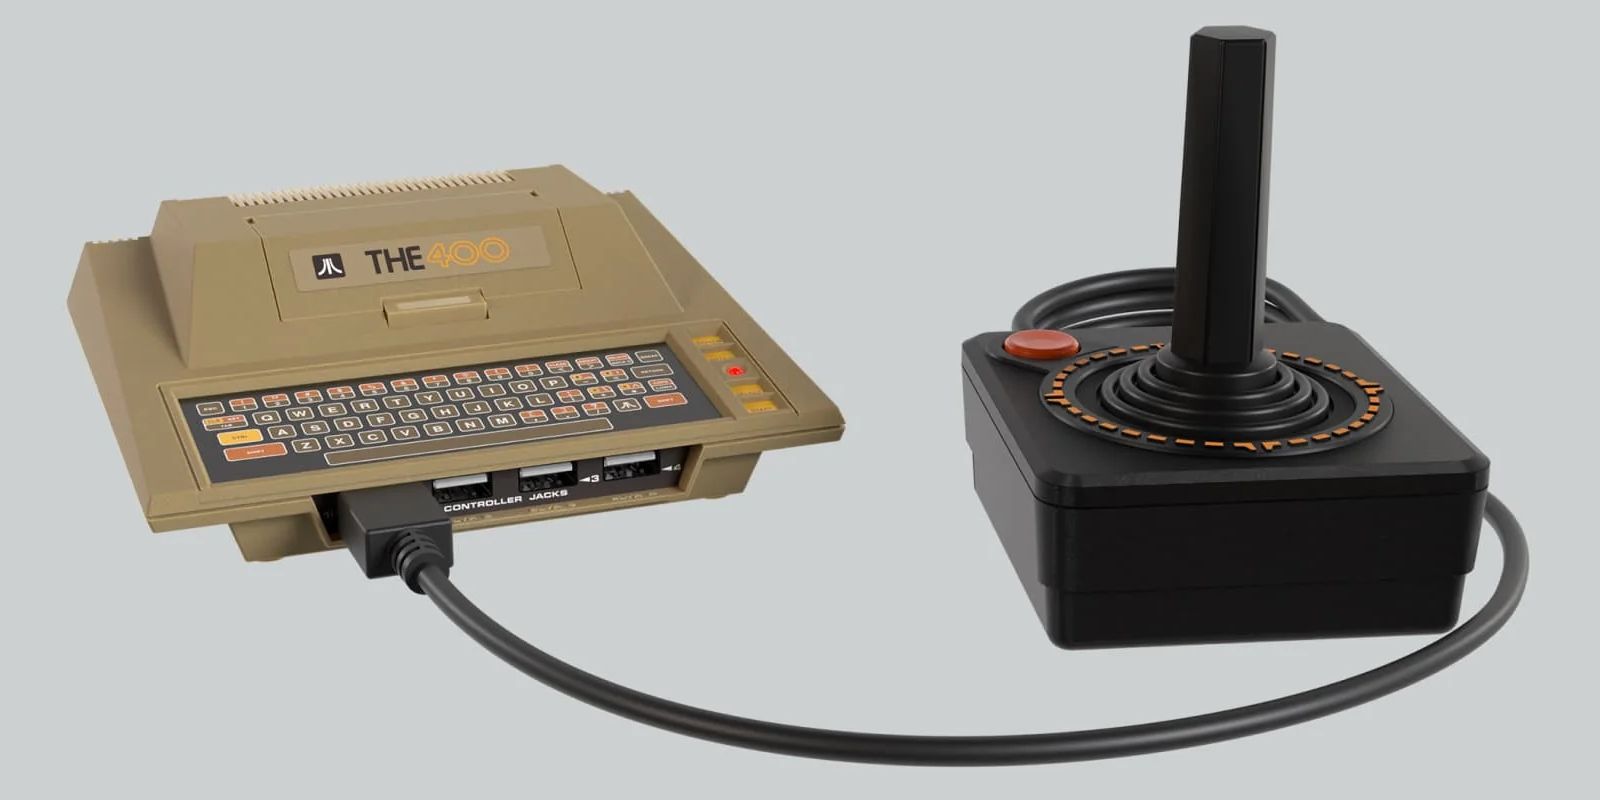 Official Atari 400 Mini product image showing the mini console and included joystick.